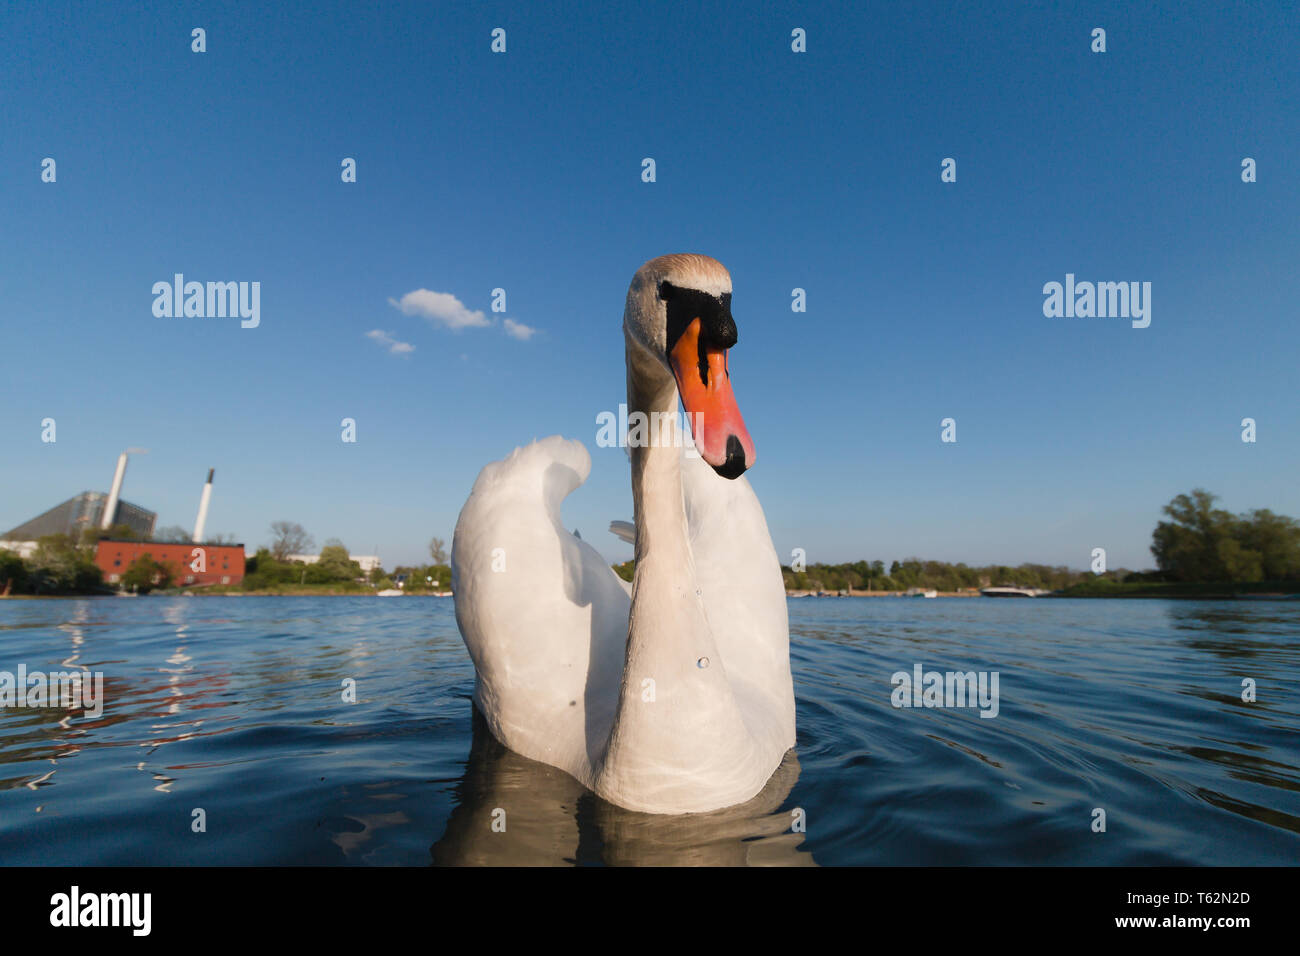 Swan in blue water wide angle lens, low angle shot Stock Photo